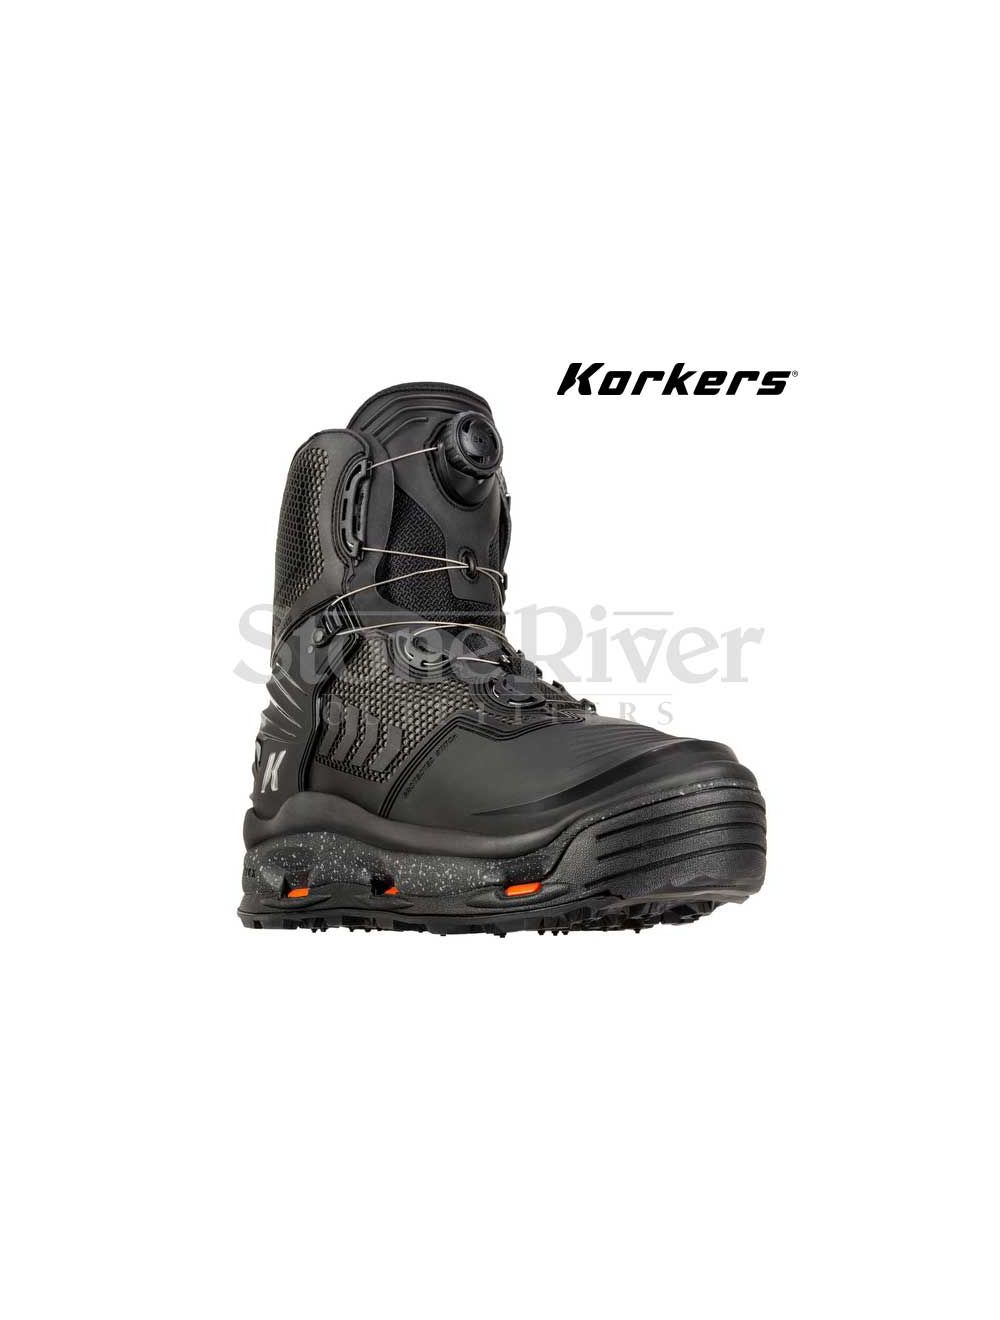 Korkers River Ops BOA Wading Boots (FB5425)